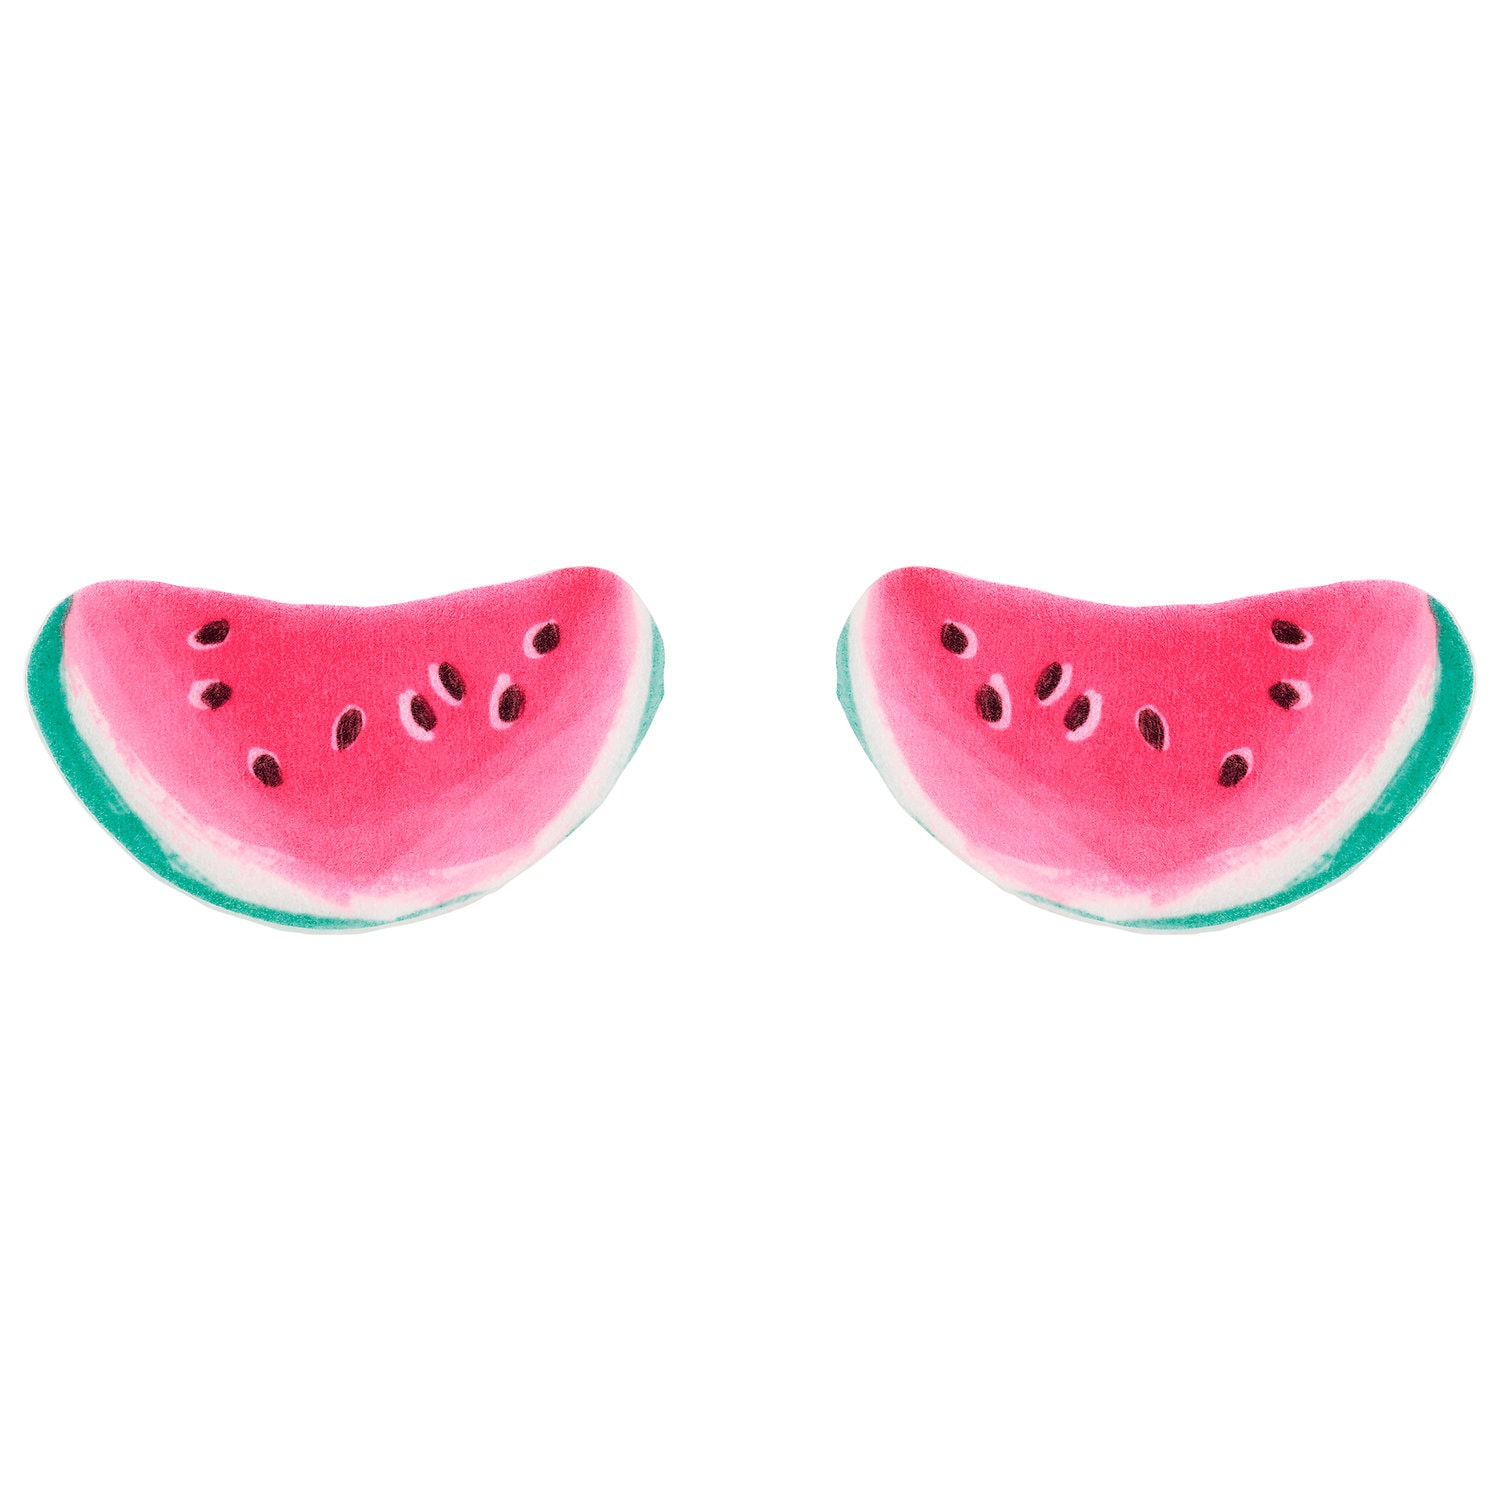 Ciate London Watermelon Eye Patches from Sephora at Miami Design District